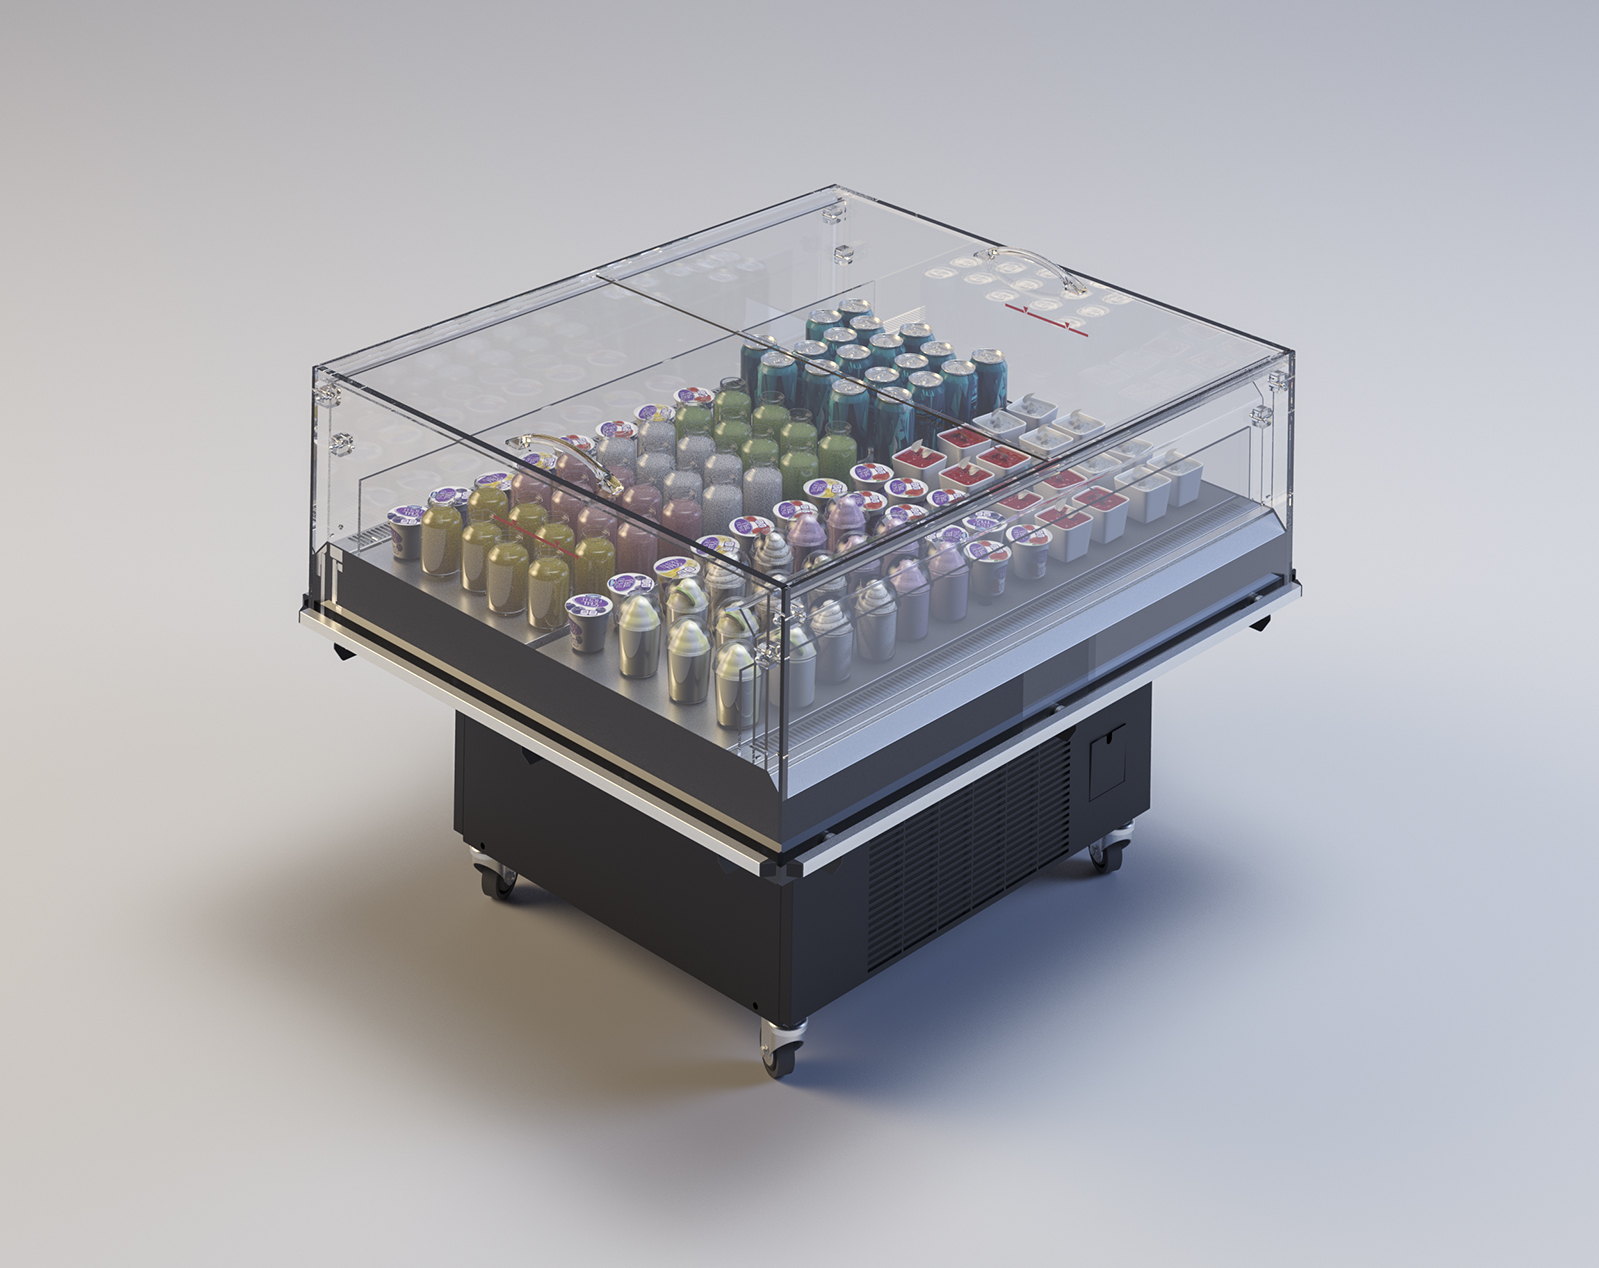 MAXIM 2 Refrigerated display case for self-service sale